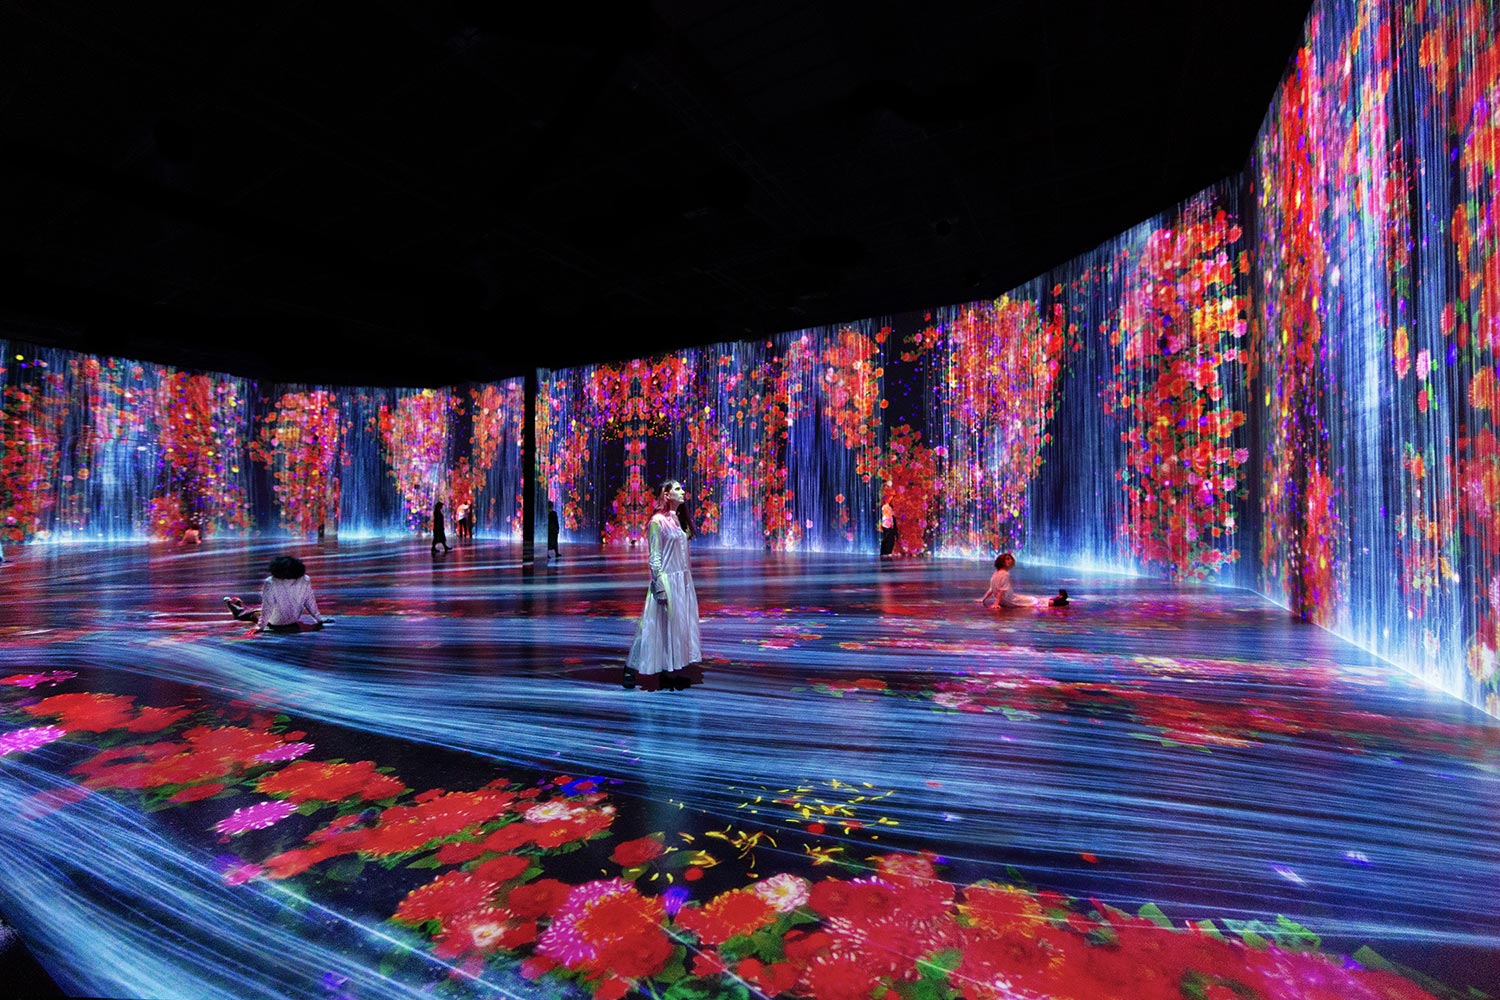 teamLab, Flowers and People, Cannot be Controlled but Live Together-Transcending Boundaries, A Whole Year per Hour 2017. Sound: Hideaki Takahashi.